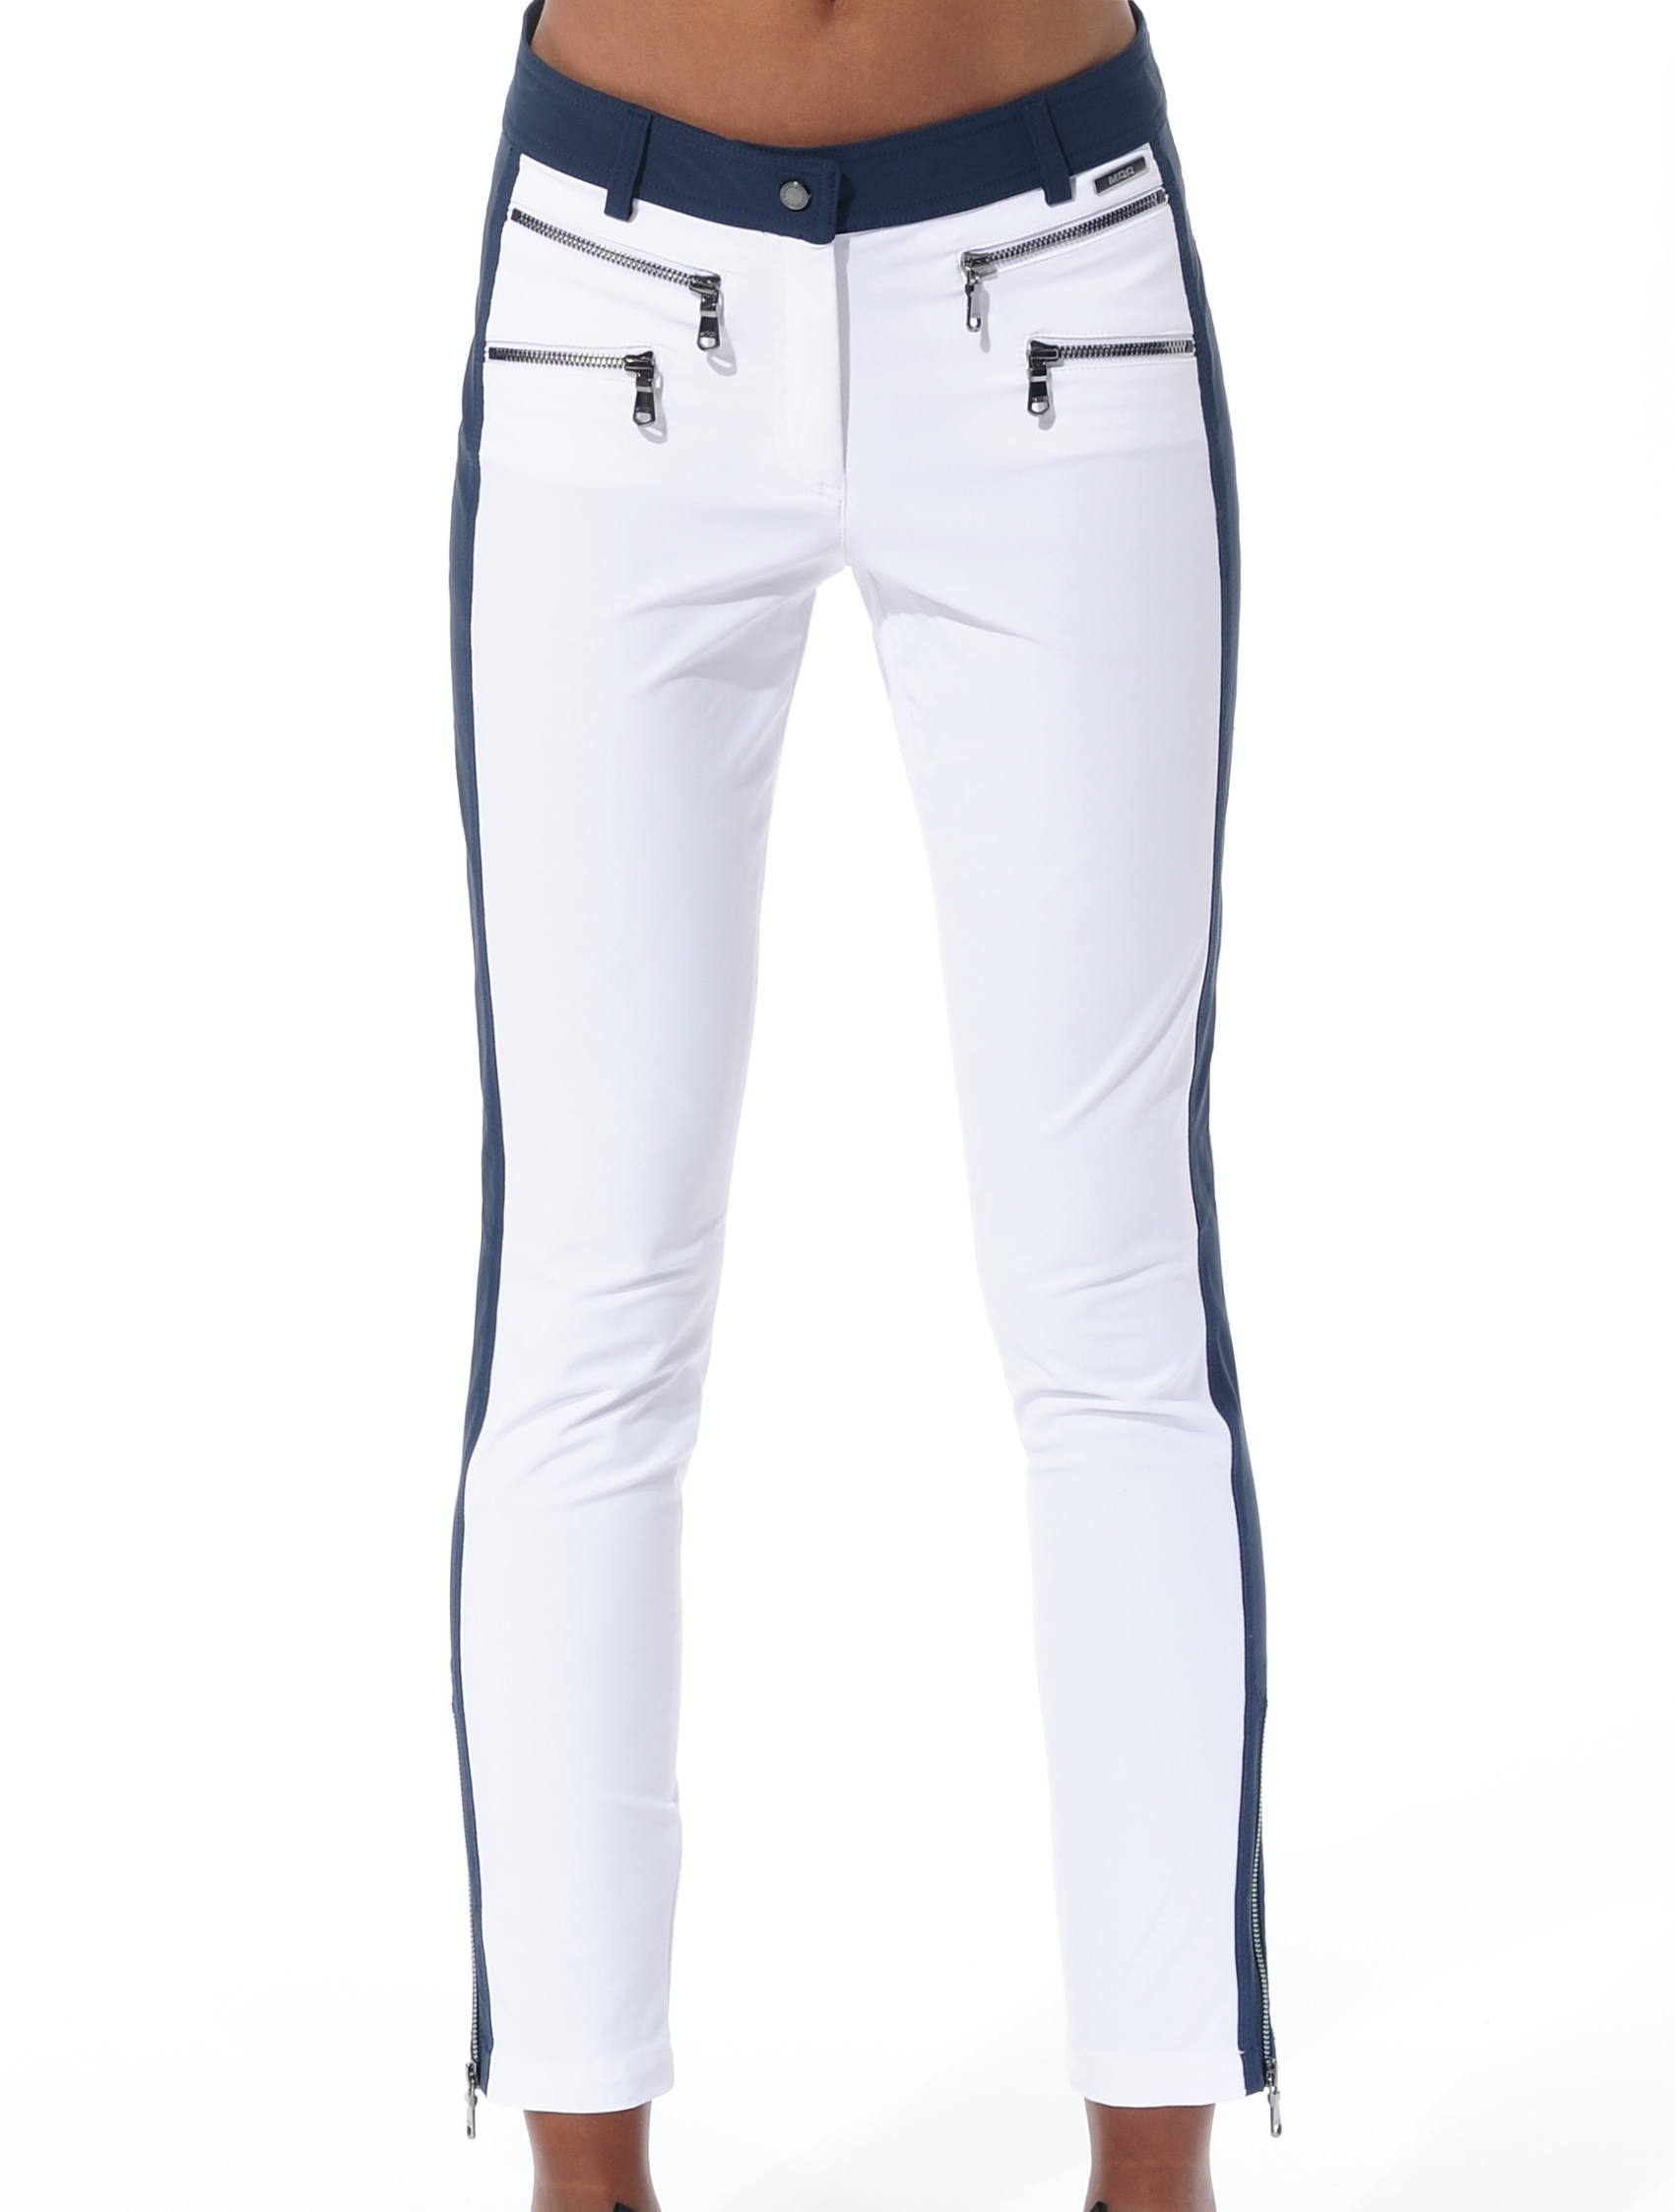 Shiny Stretch Double Zip Ankle Pants white/navy